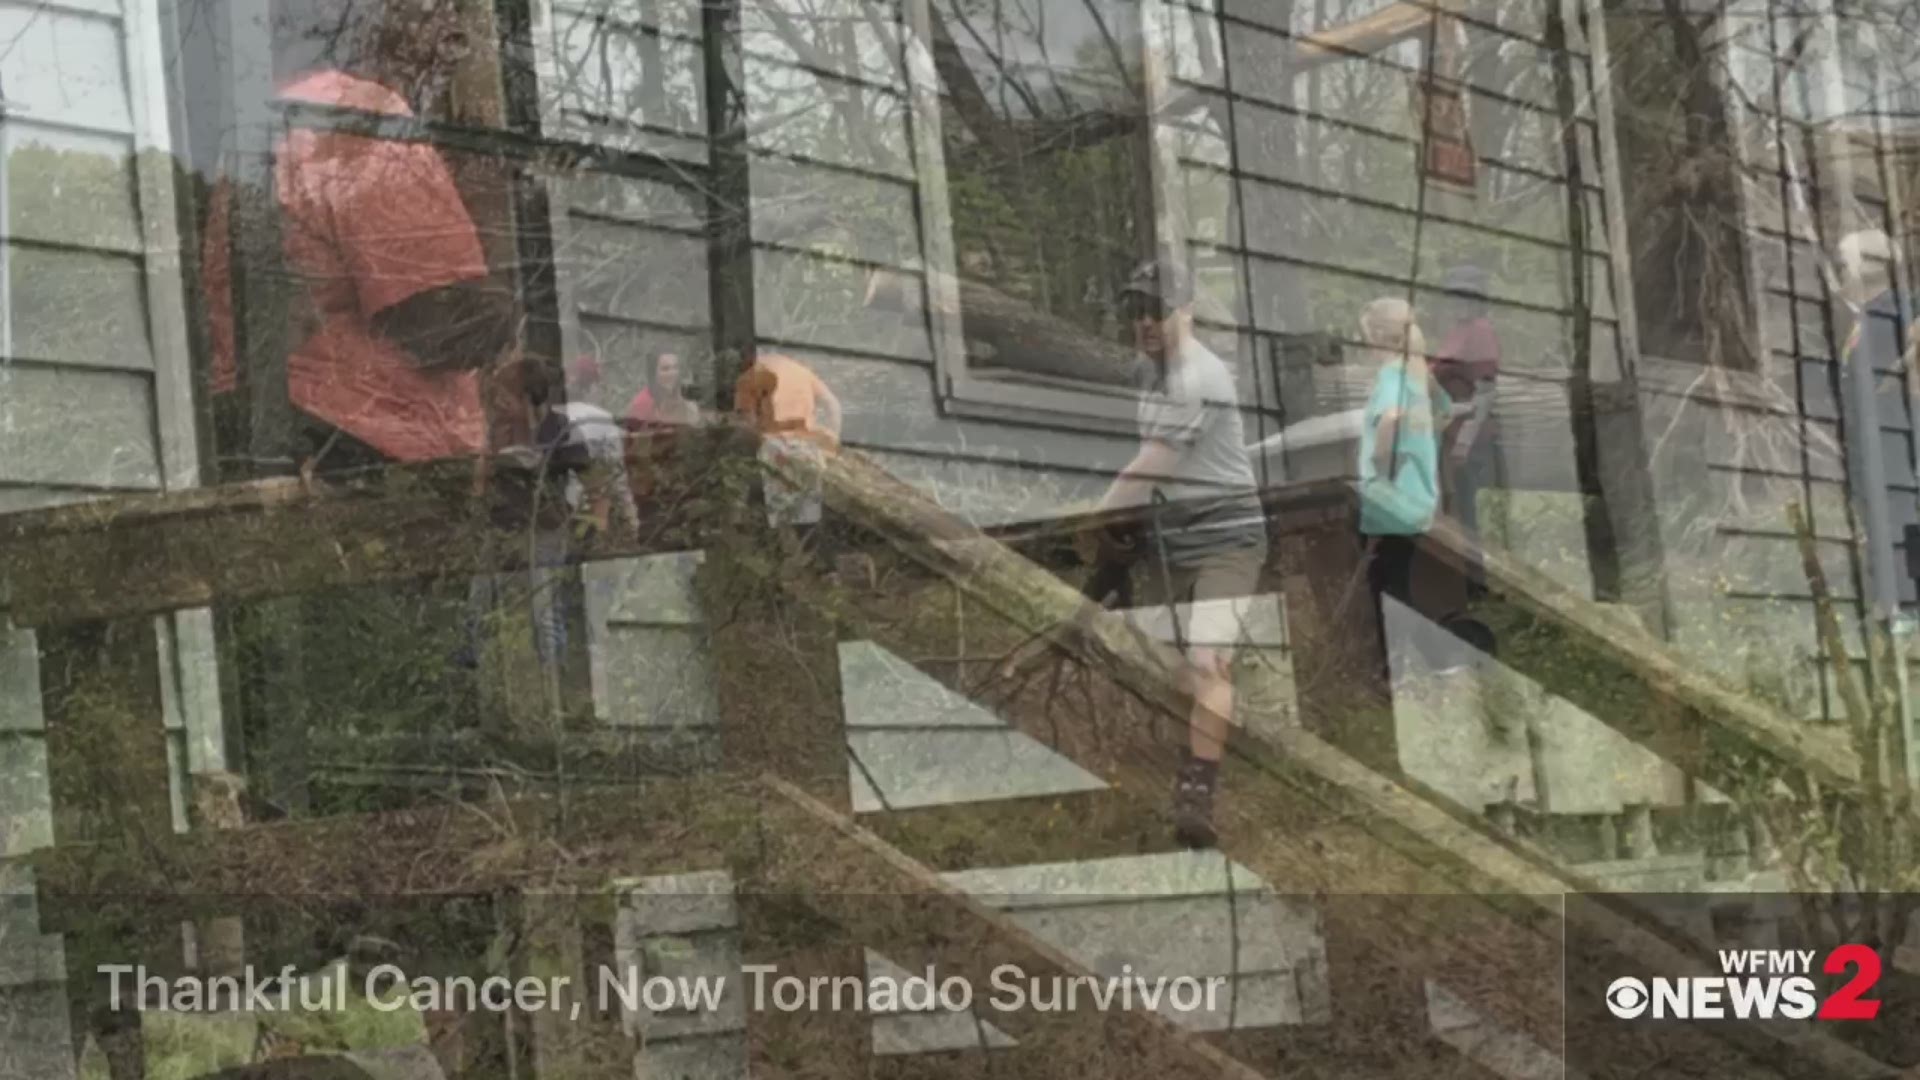 Volunteers help woman whose house sustained severe damage from April 15 tornado in Greensboro. She is also a cancer survivor and very very good inspiration to be around.